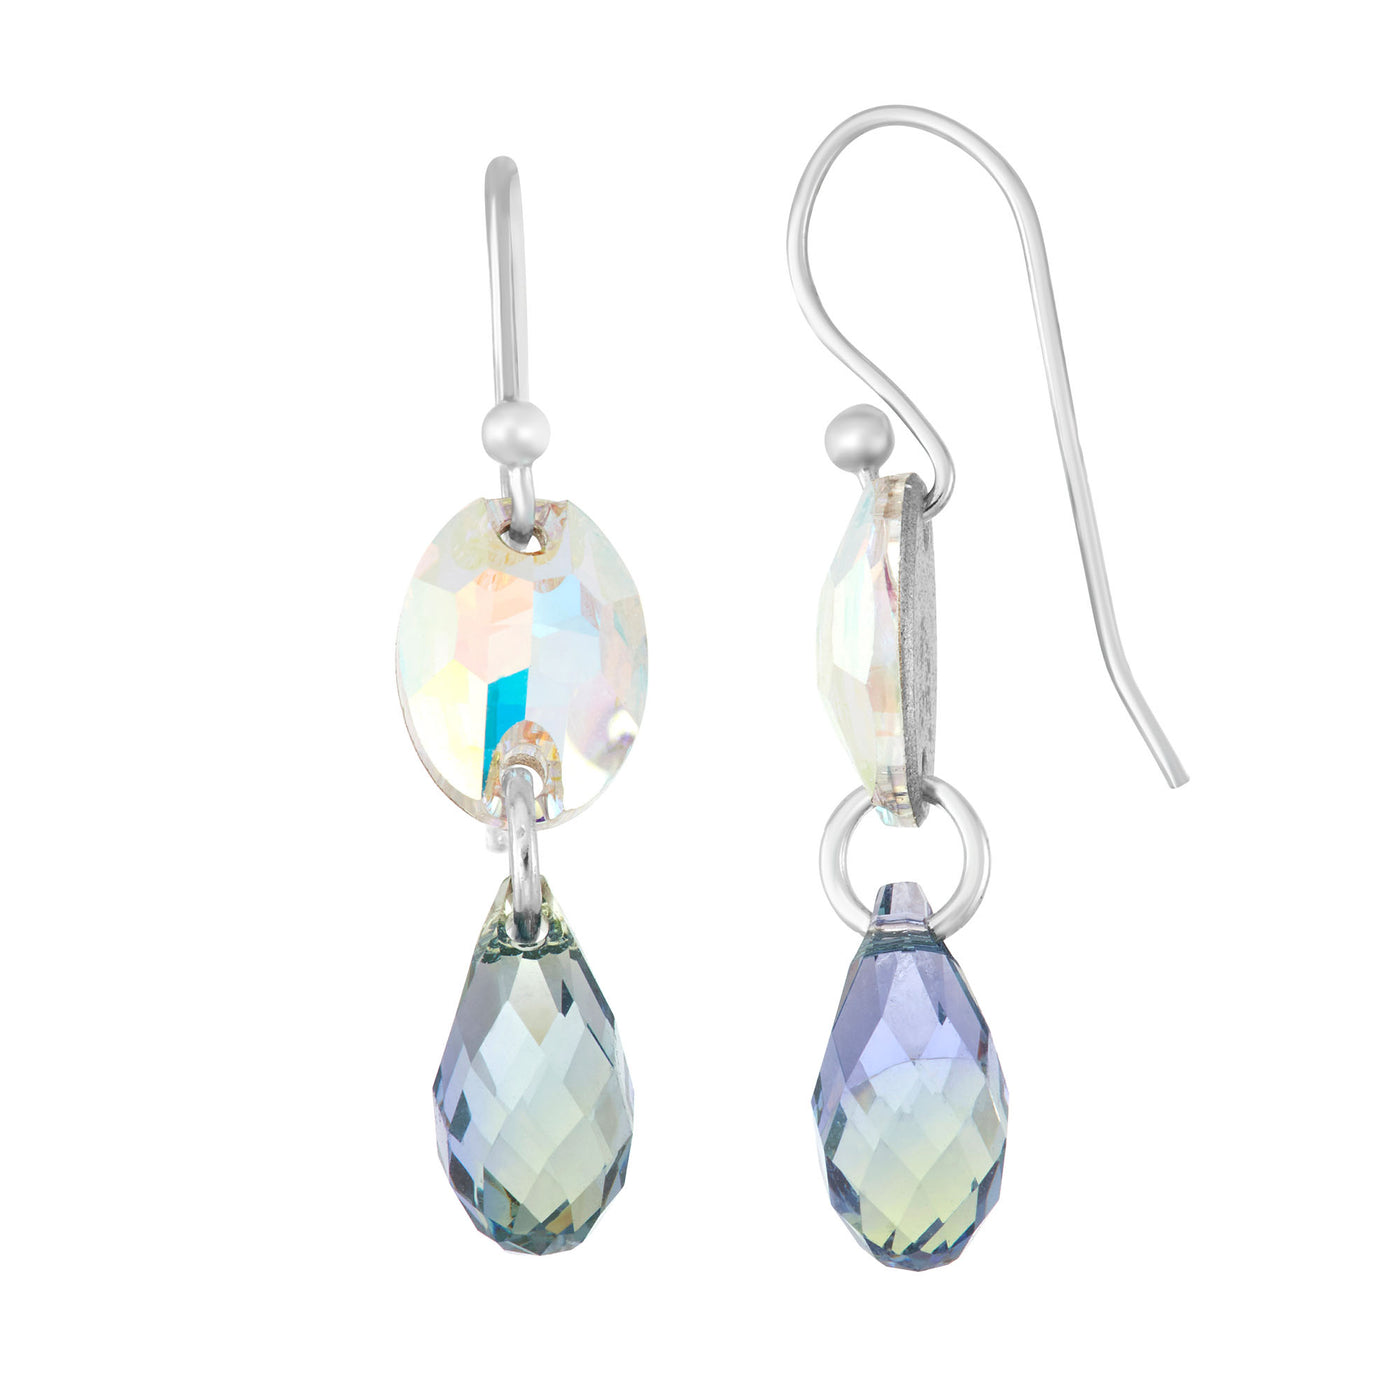 Rebecca Sloane Silver Oval Tear Drop Earring With Aurora Crystals